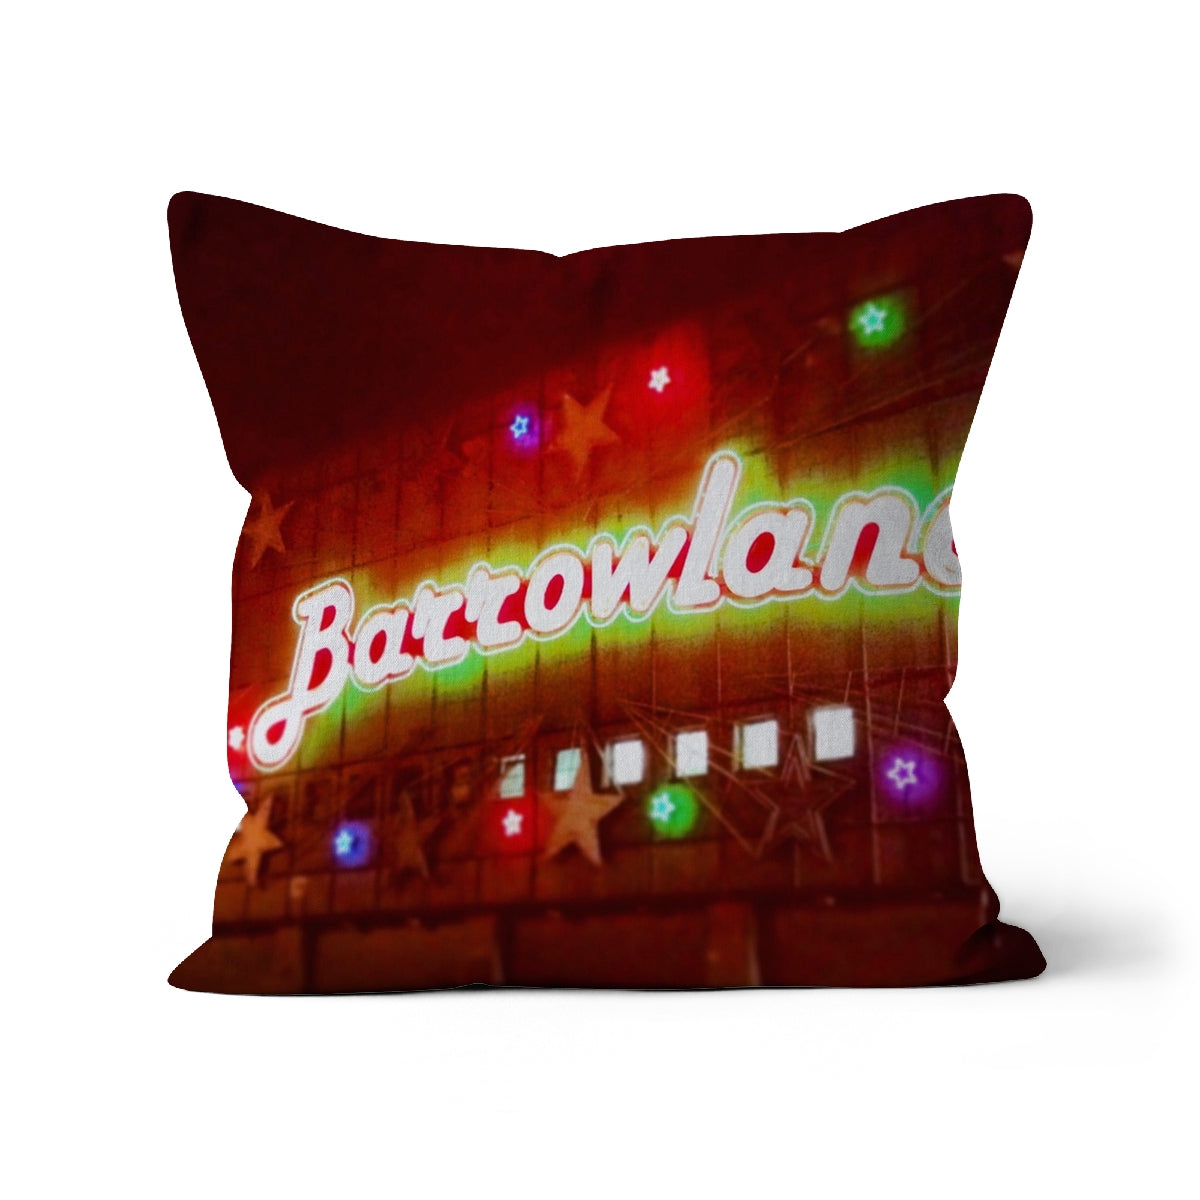 A Neon Glasgow Barrowlands Art Gifts Cushion-Cushions-Edinburgh & Glasgow Art Gallery-Faux Suede-24"x24"-Paintings, Prints, Homeware, Art Gifts From Scotland By Scottish Artist Kevin Hunter